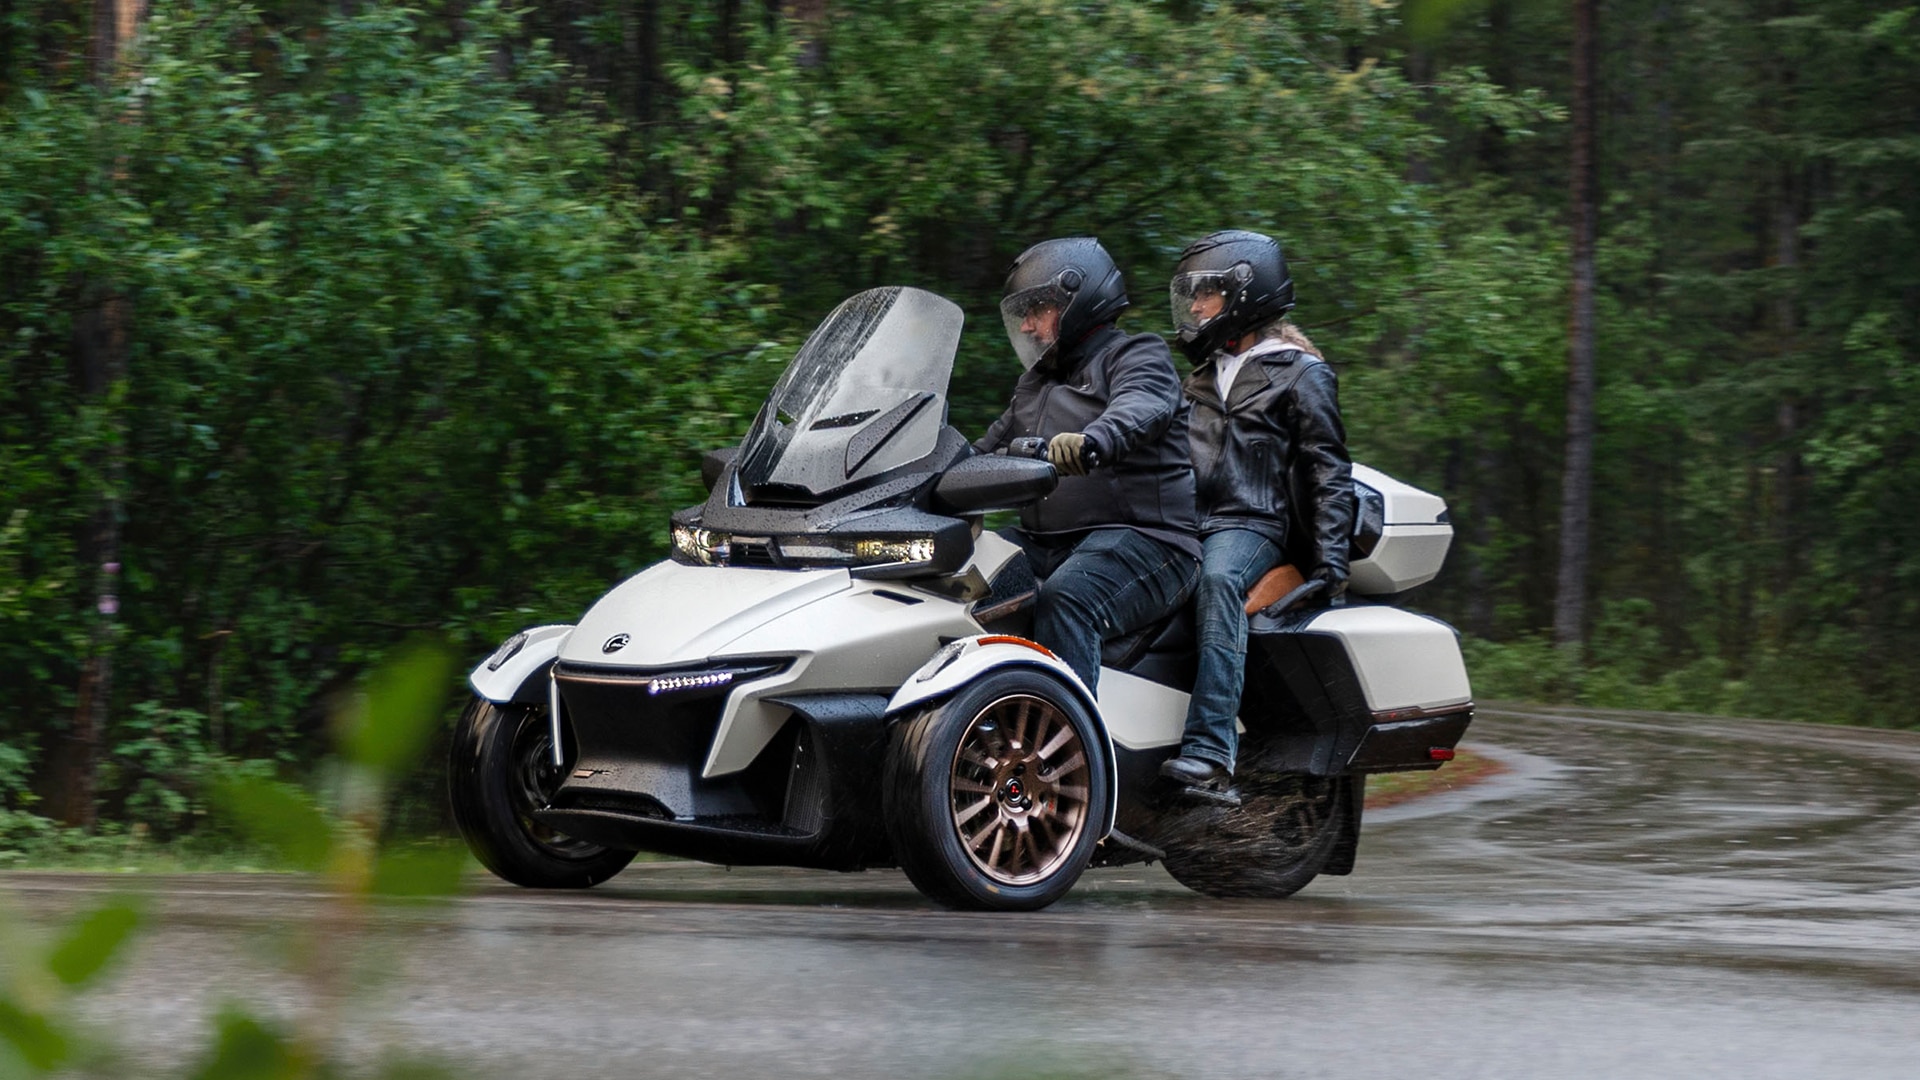 Can-Am Spyder RT in a tight turn on a rainy road in a forest